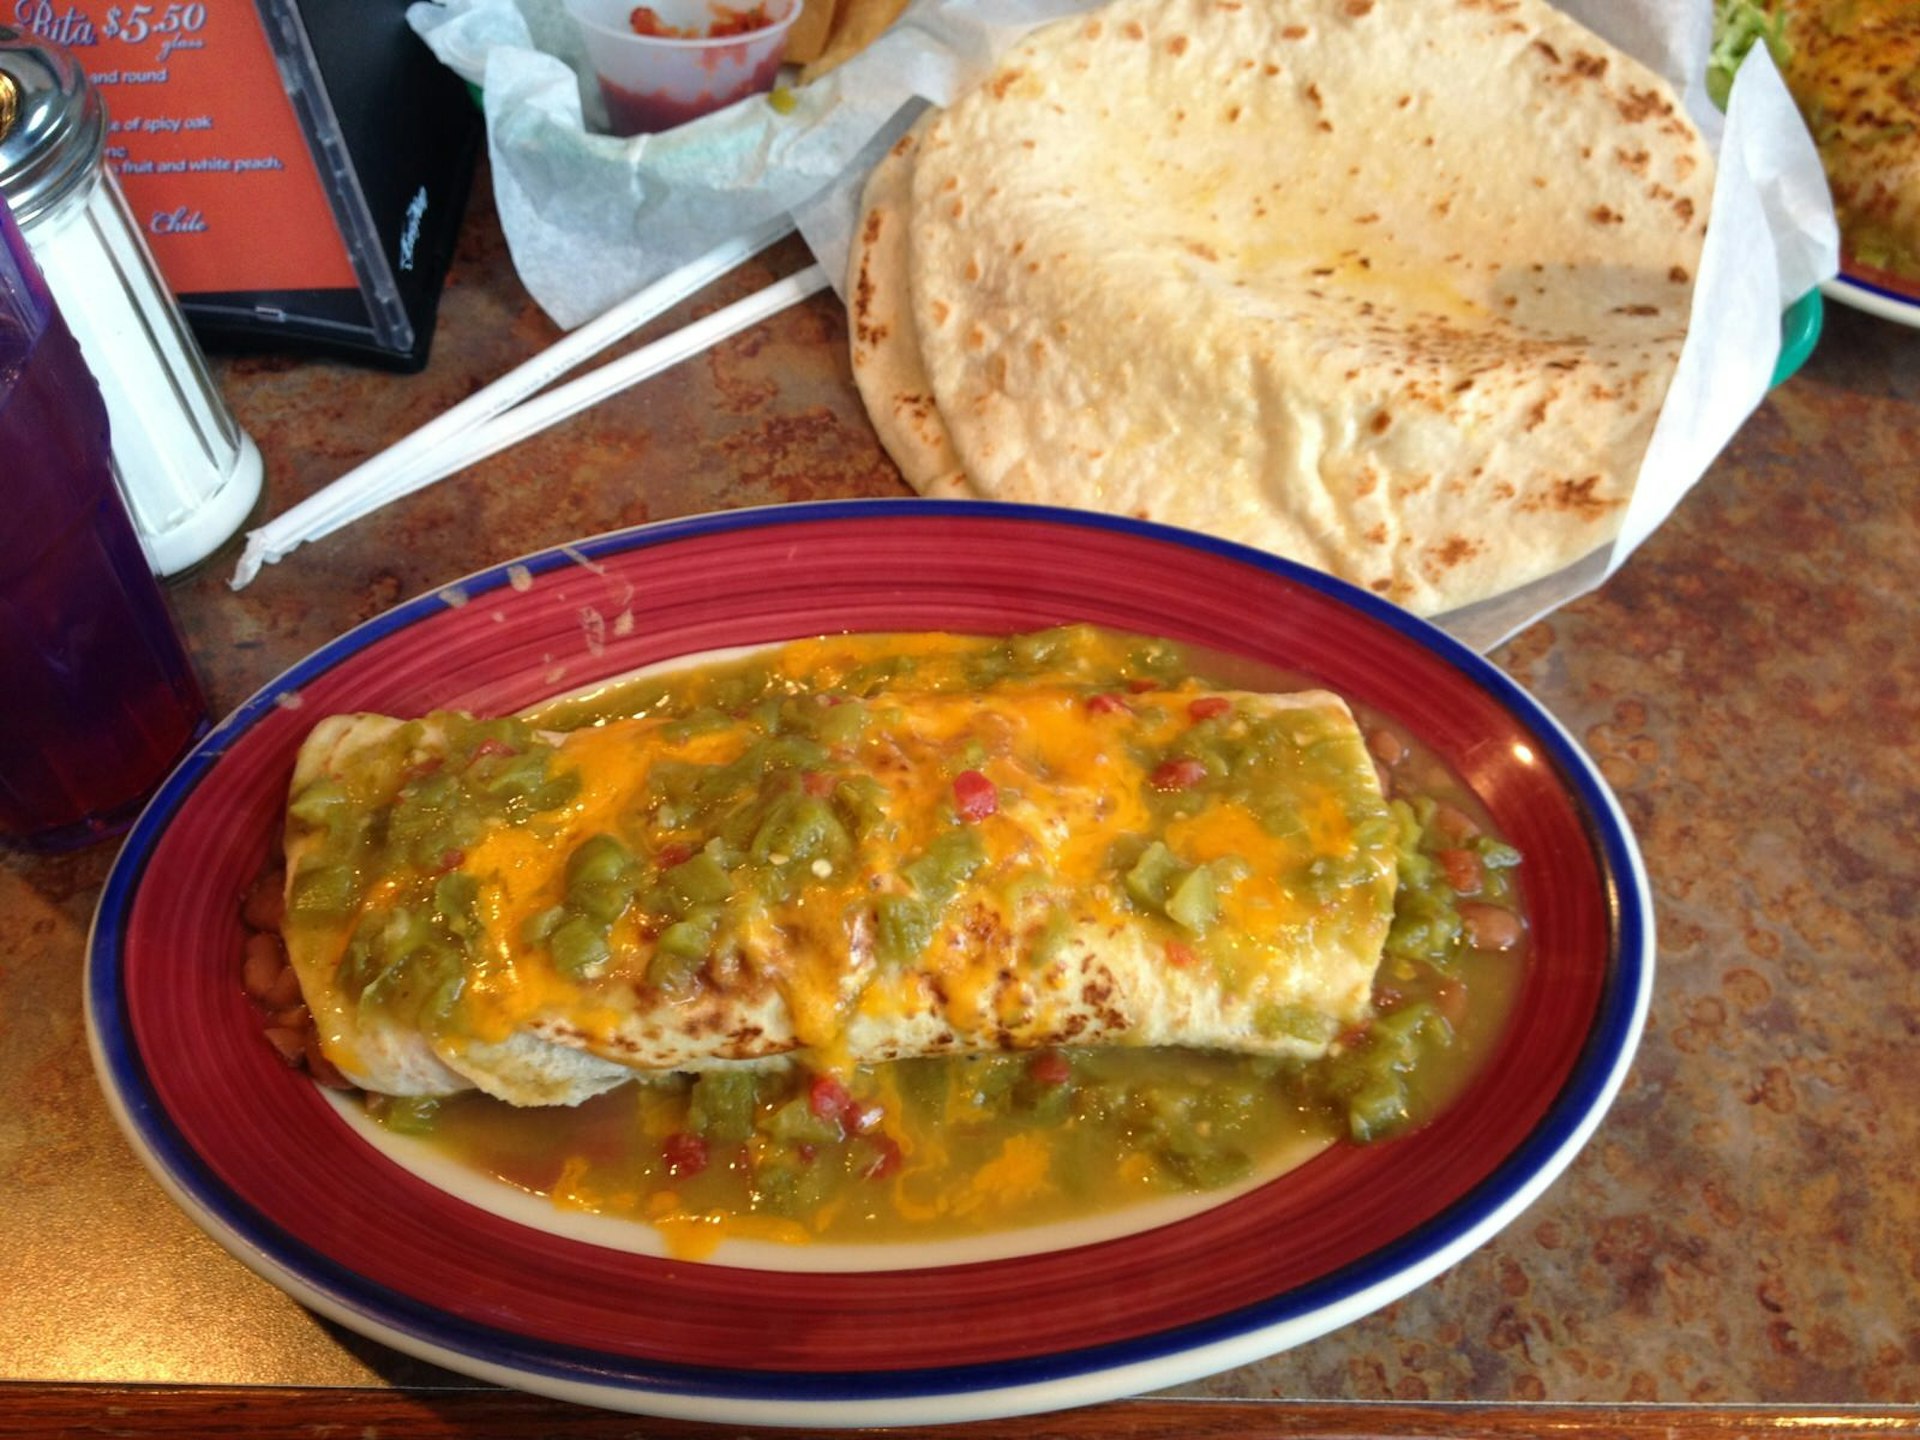 Burrito smothered in cheddar cheese and green chile at Duran's Station in Albuquerque © Megan Eaves / Lonely Planet